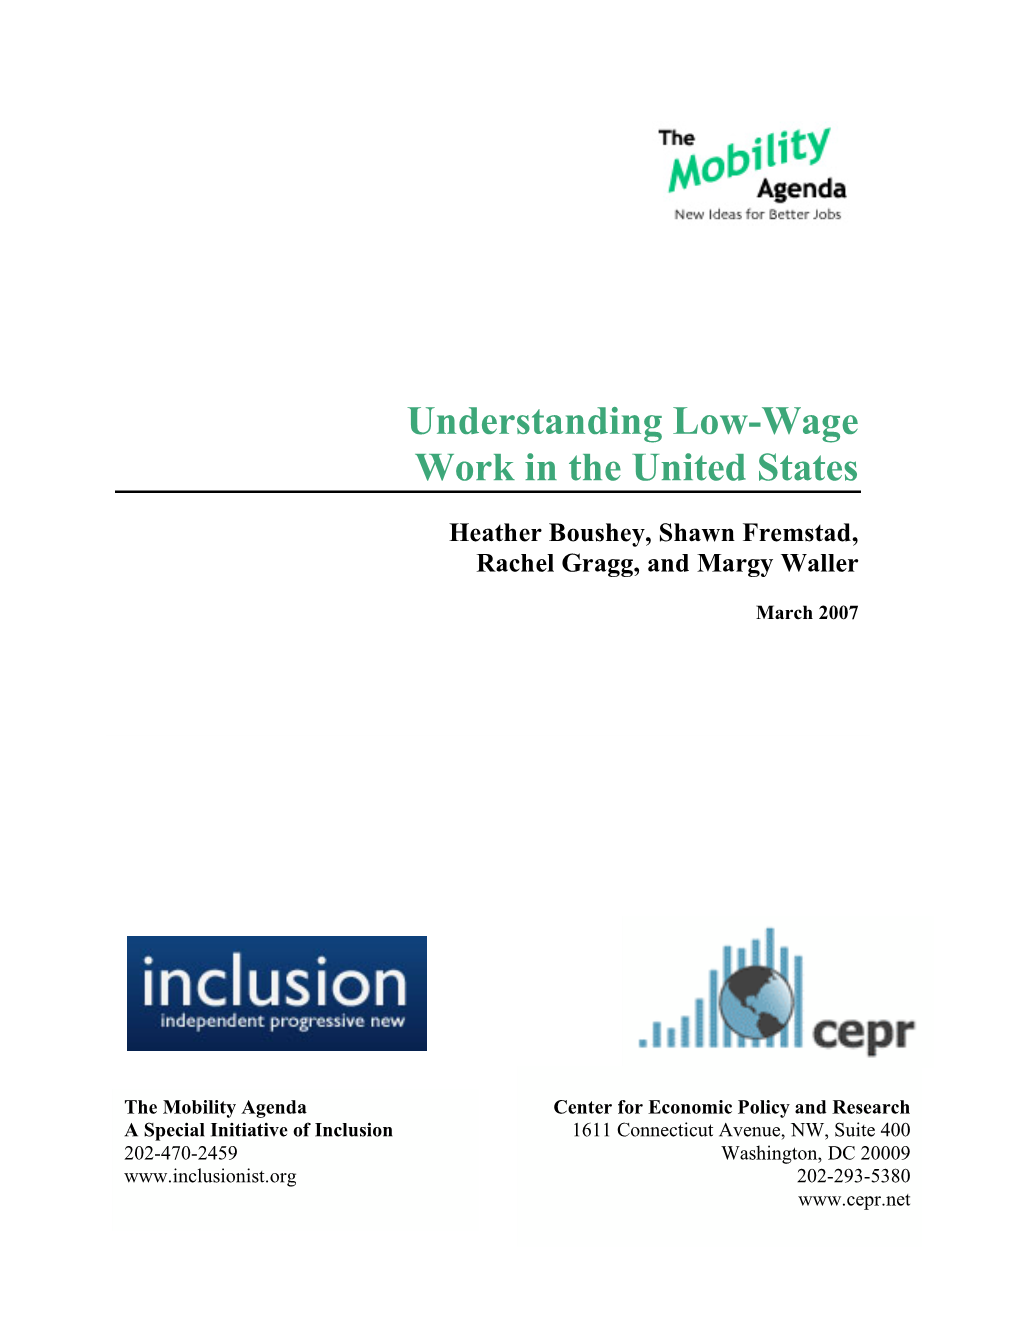 Understanding Low-Wage Work in the United States